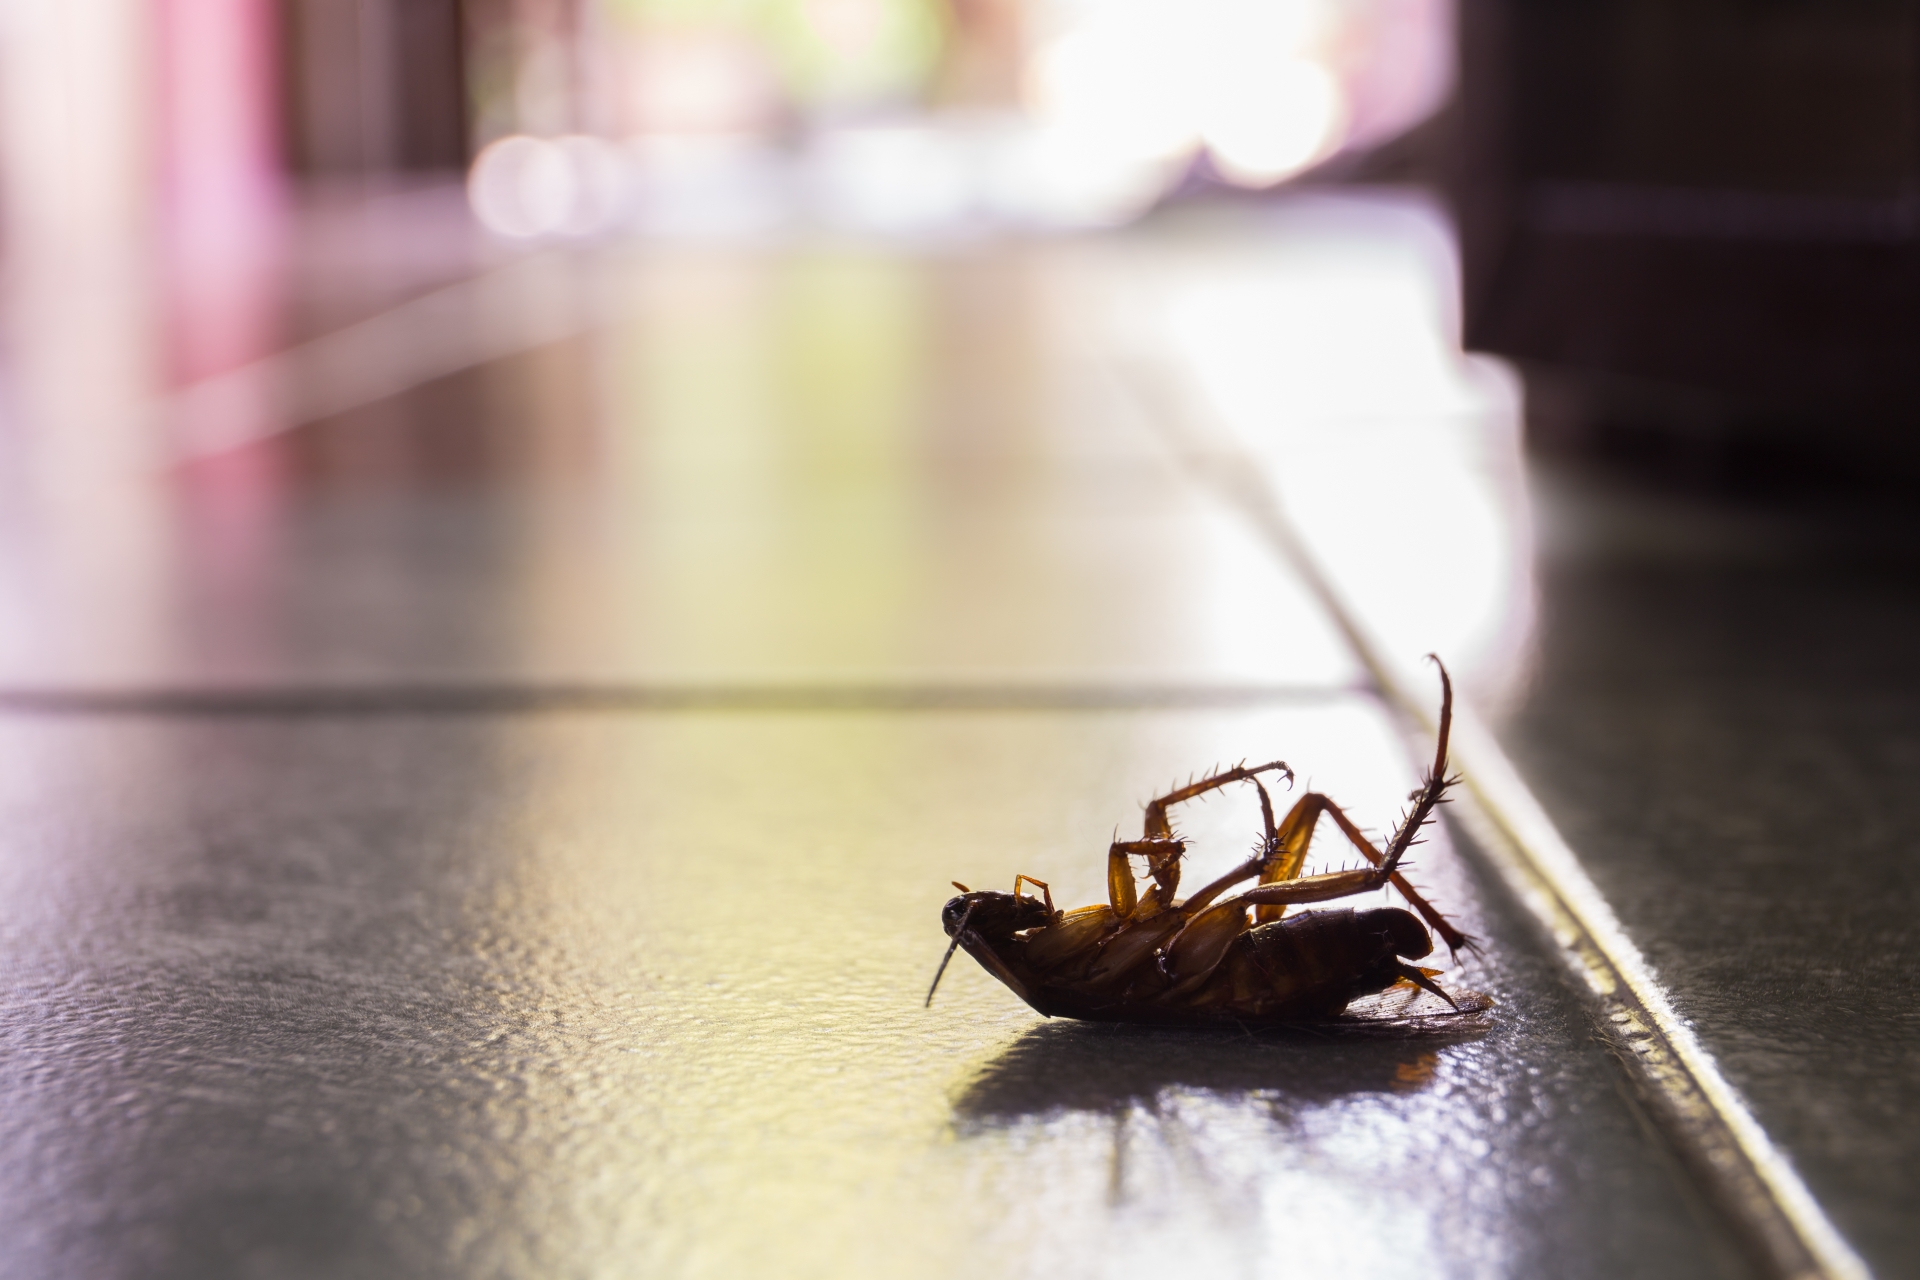 Cockroach Control, Pest Control in Notting Hill, W11. Call Now 020 8166 9746